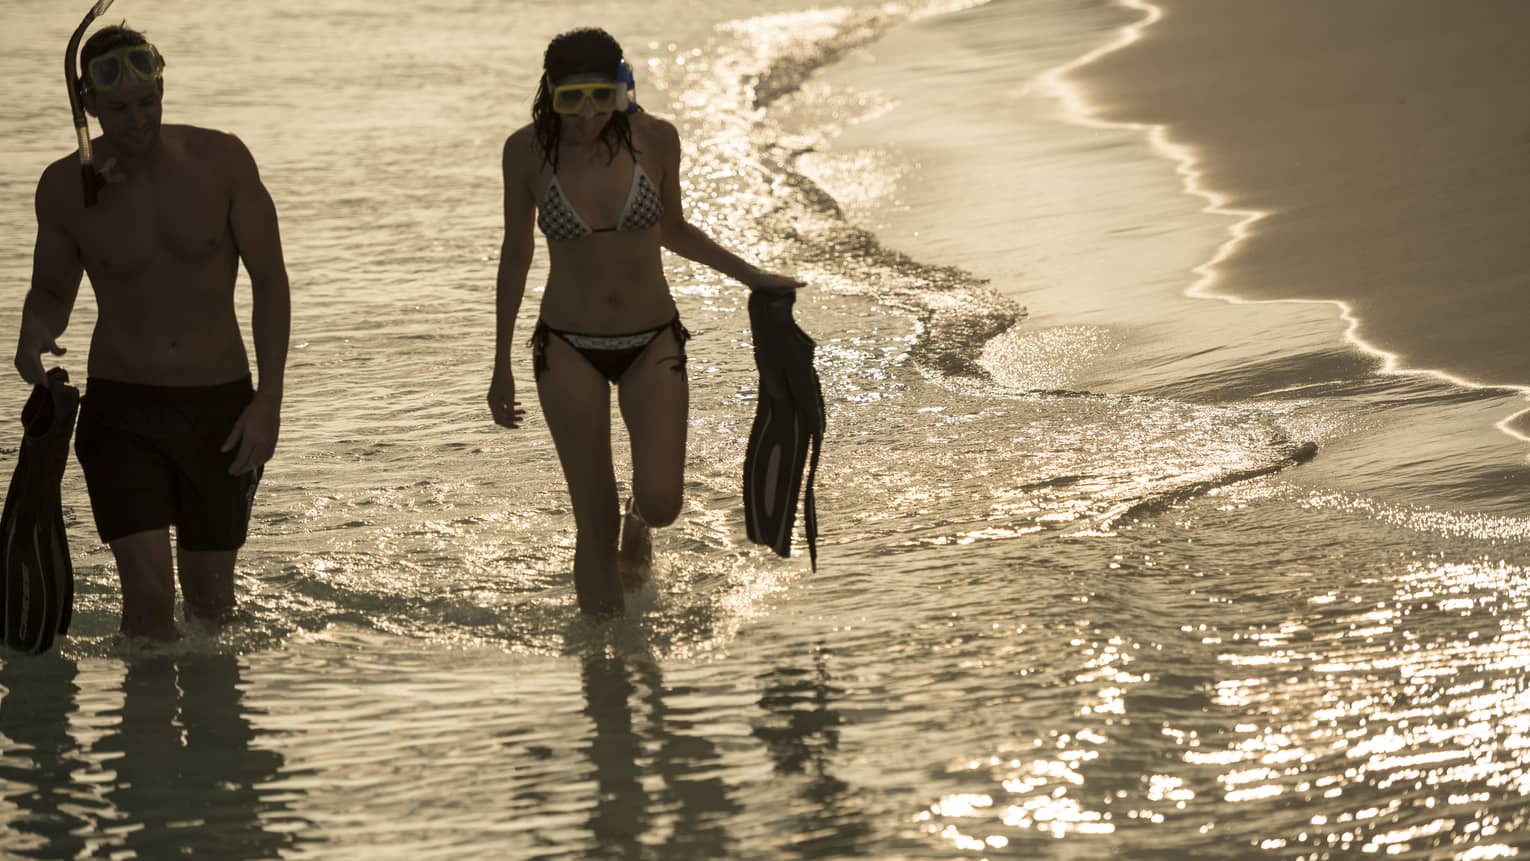 Two people in swimsuits and snorkel gear hold fins as they walk along the water's edge, sun reflecting off gentle waves.